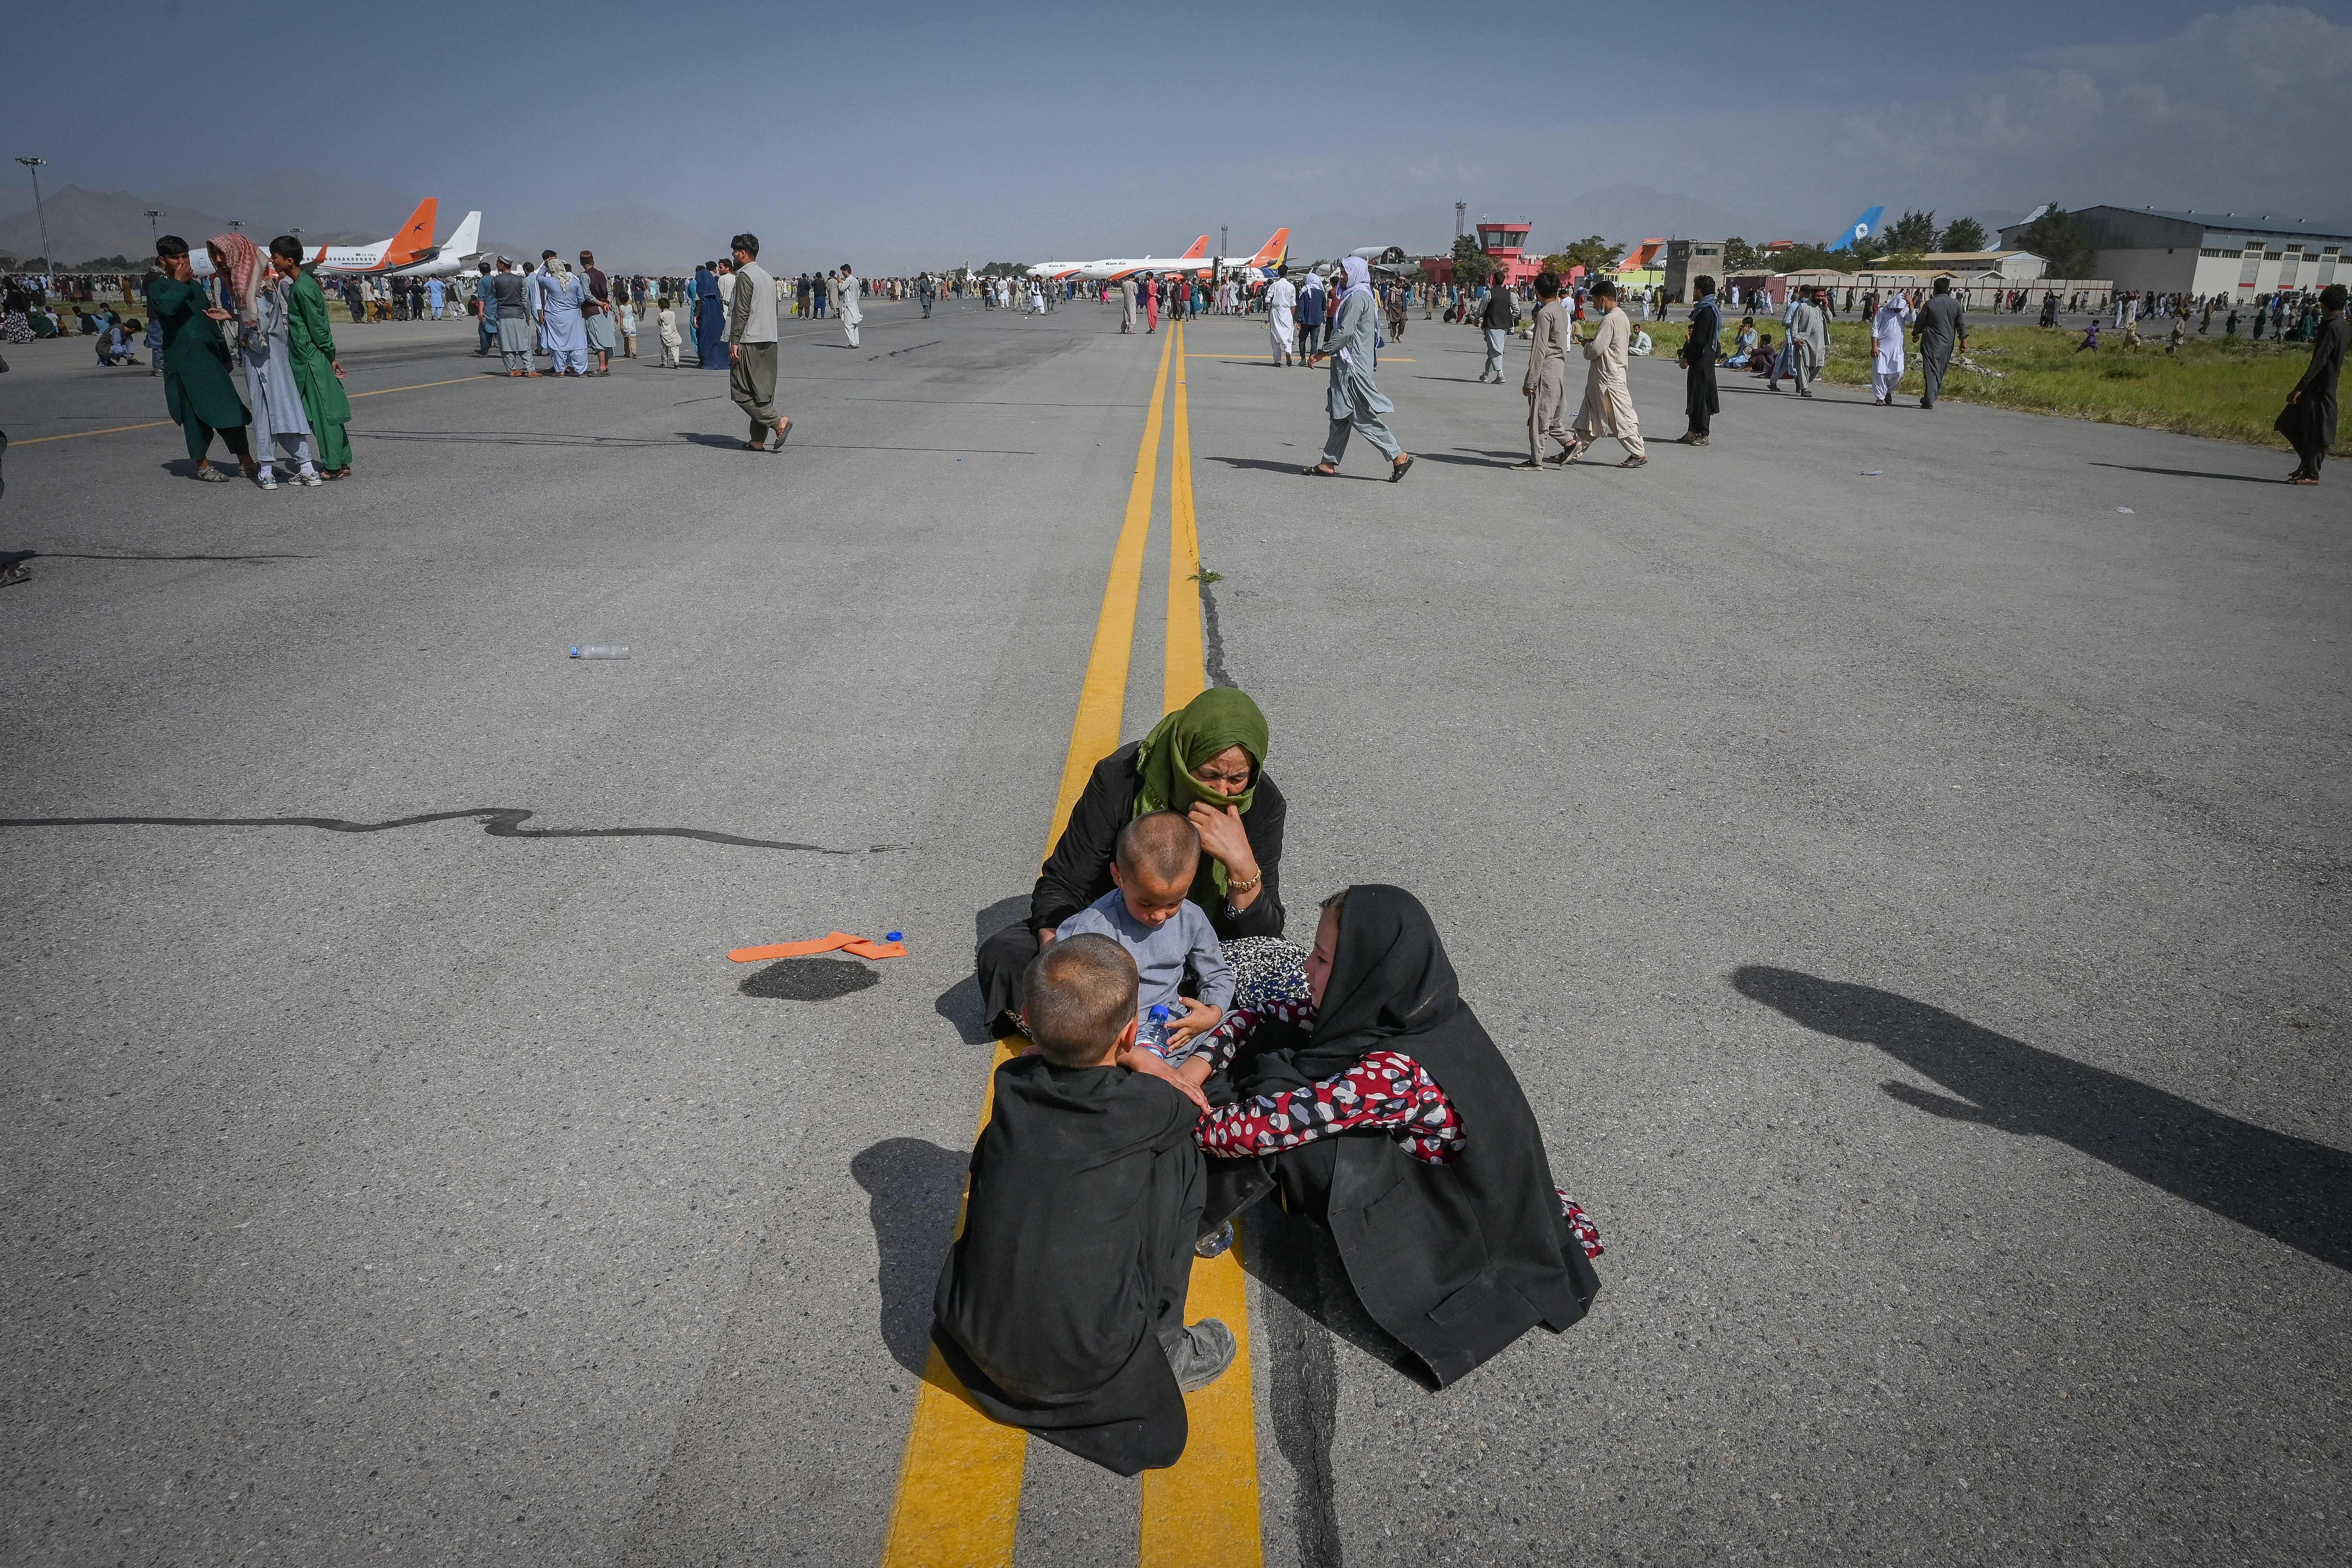 Afghans stand outside on the runway. In the foreground a family sits on the tarmac.